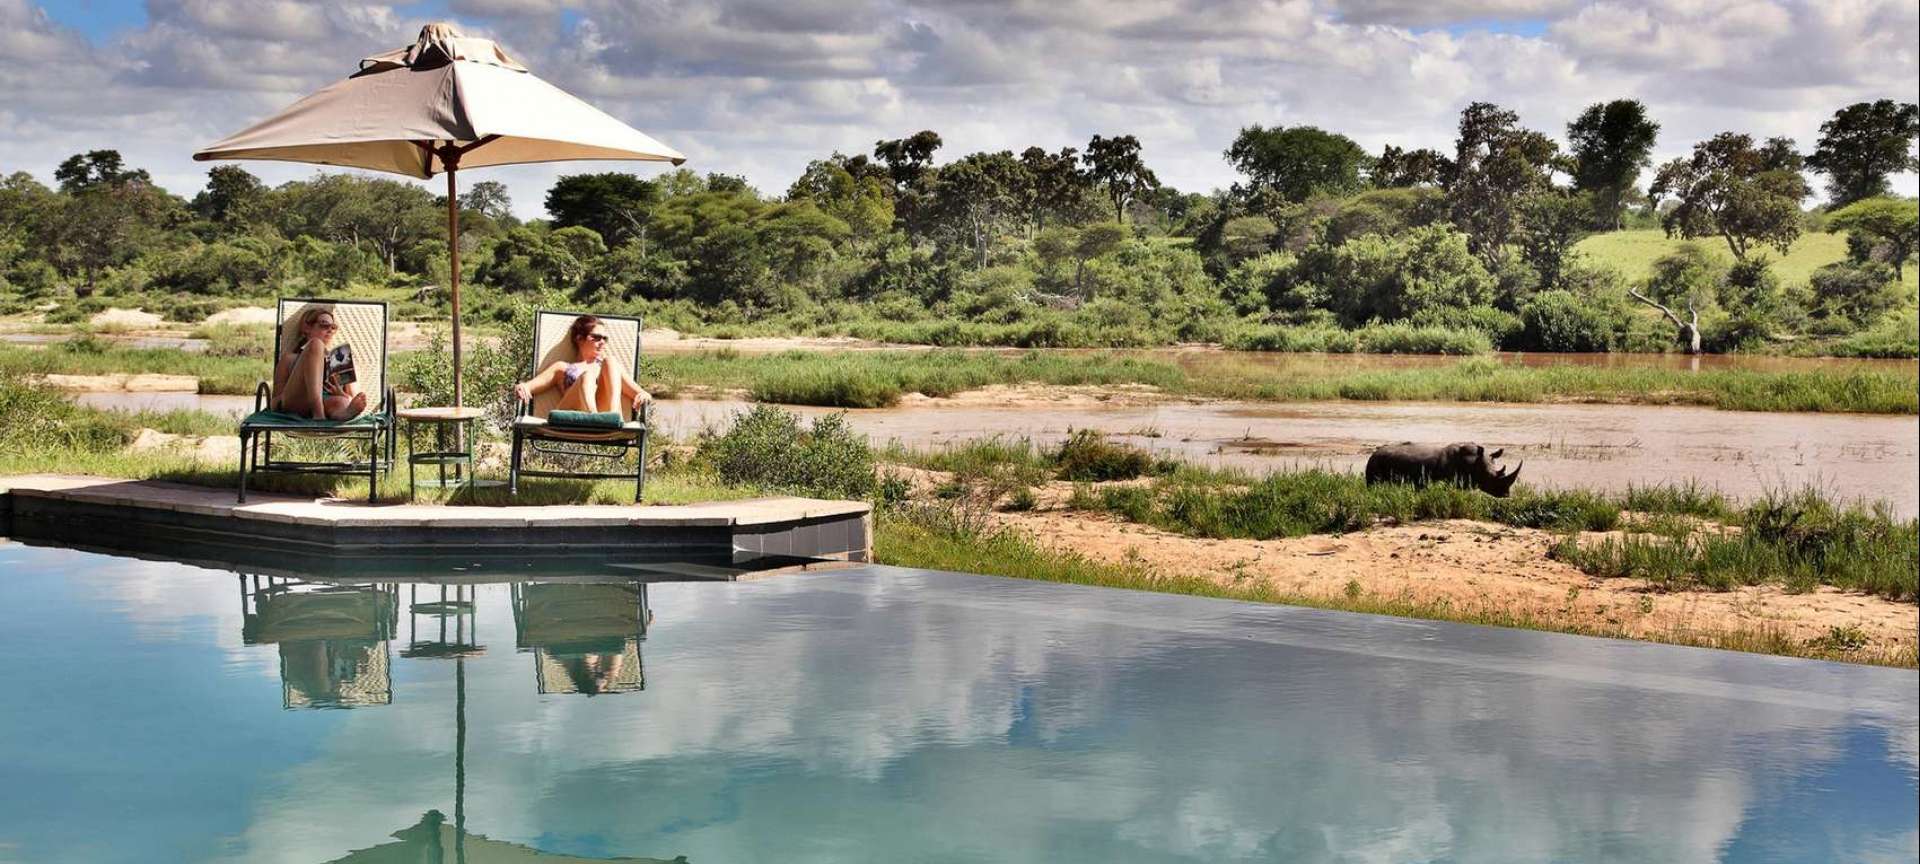 Mashatu Game Reserve safaris, tours and holiday packages | Discover ...